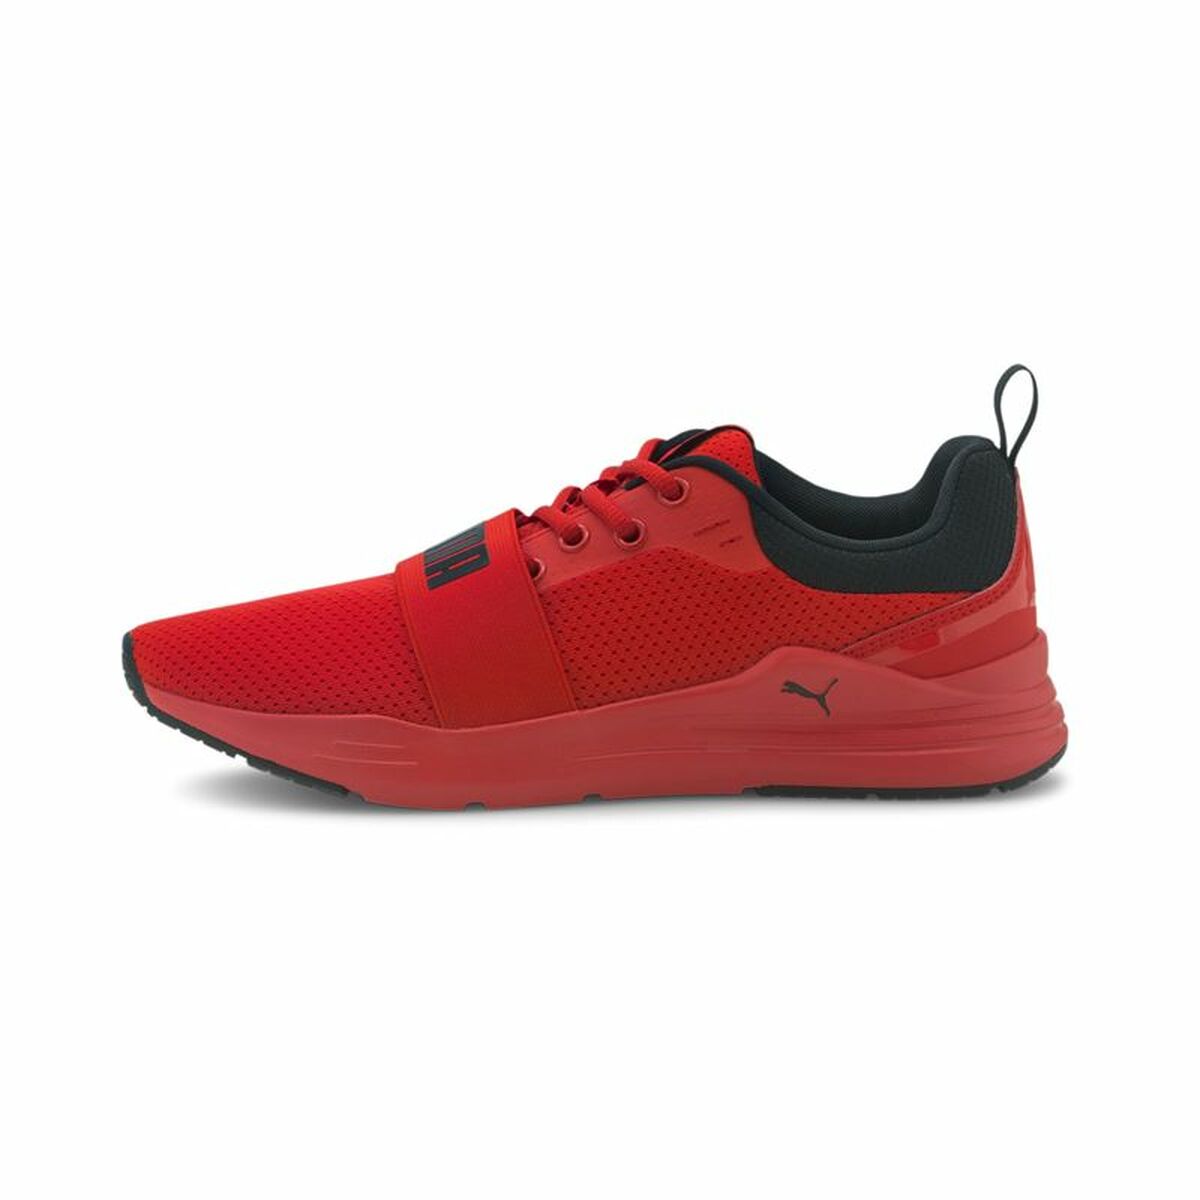 Running Shoes for Adults Puma Wired Red